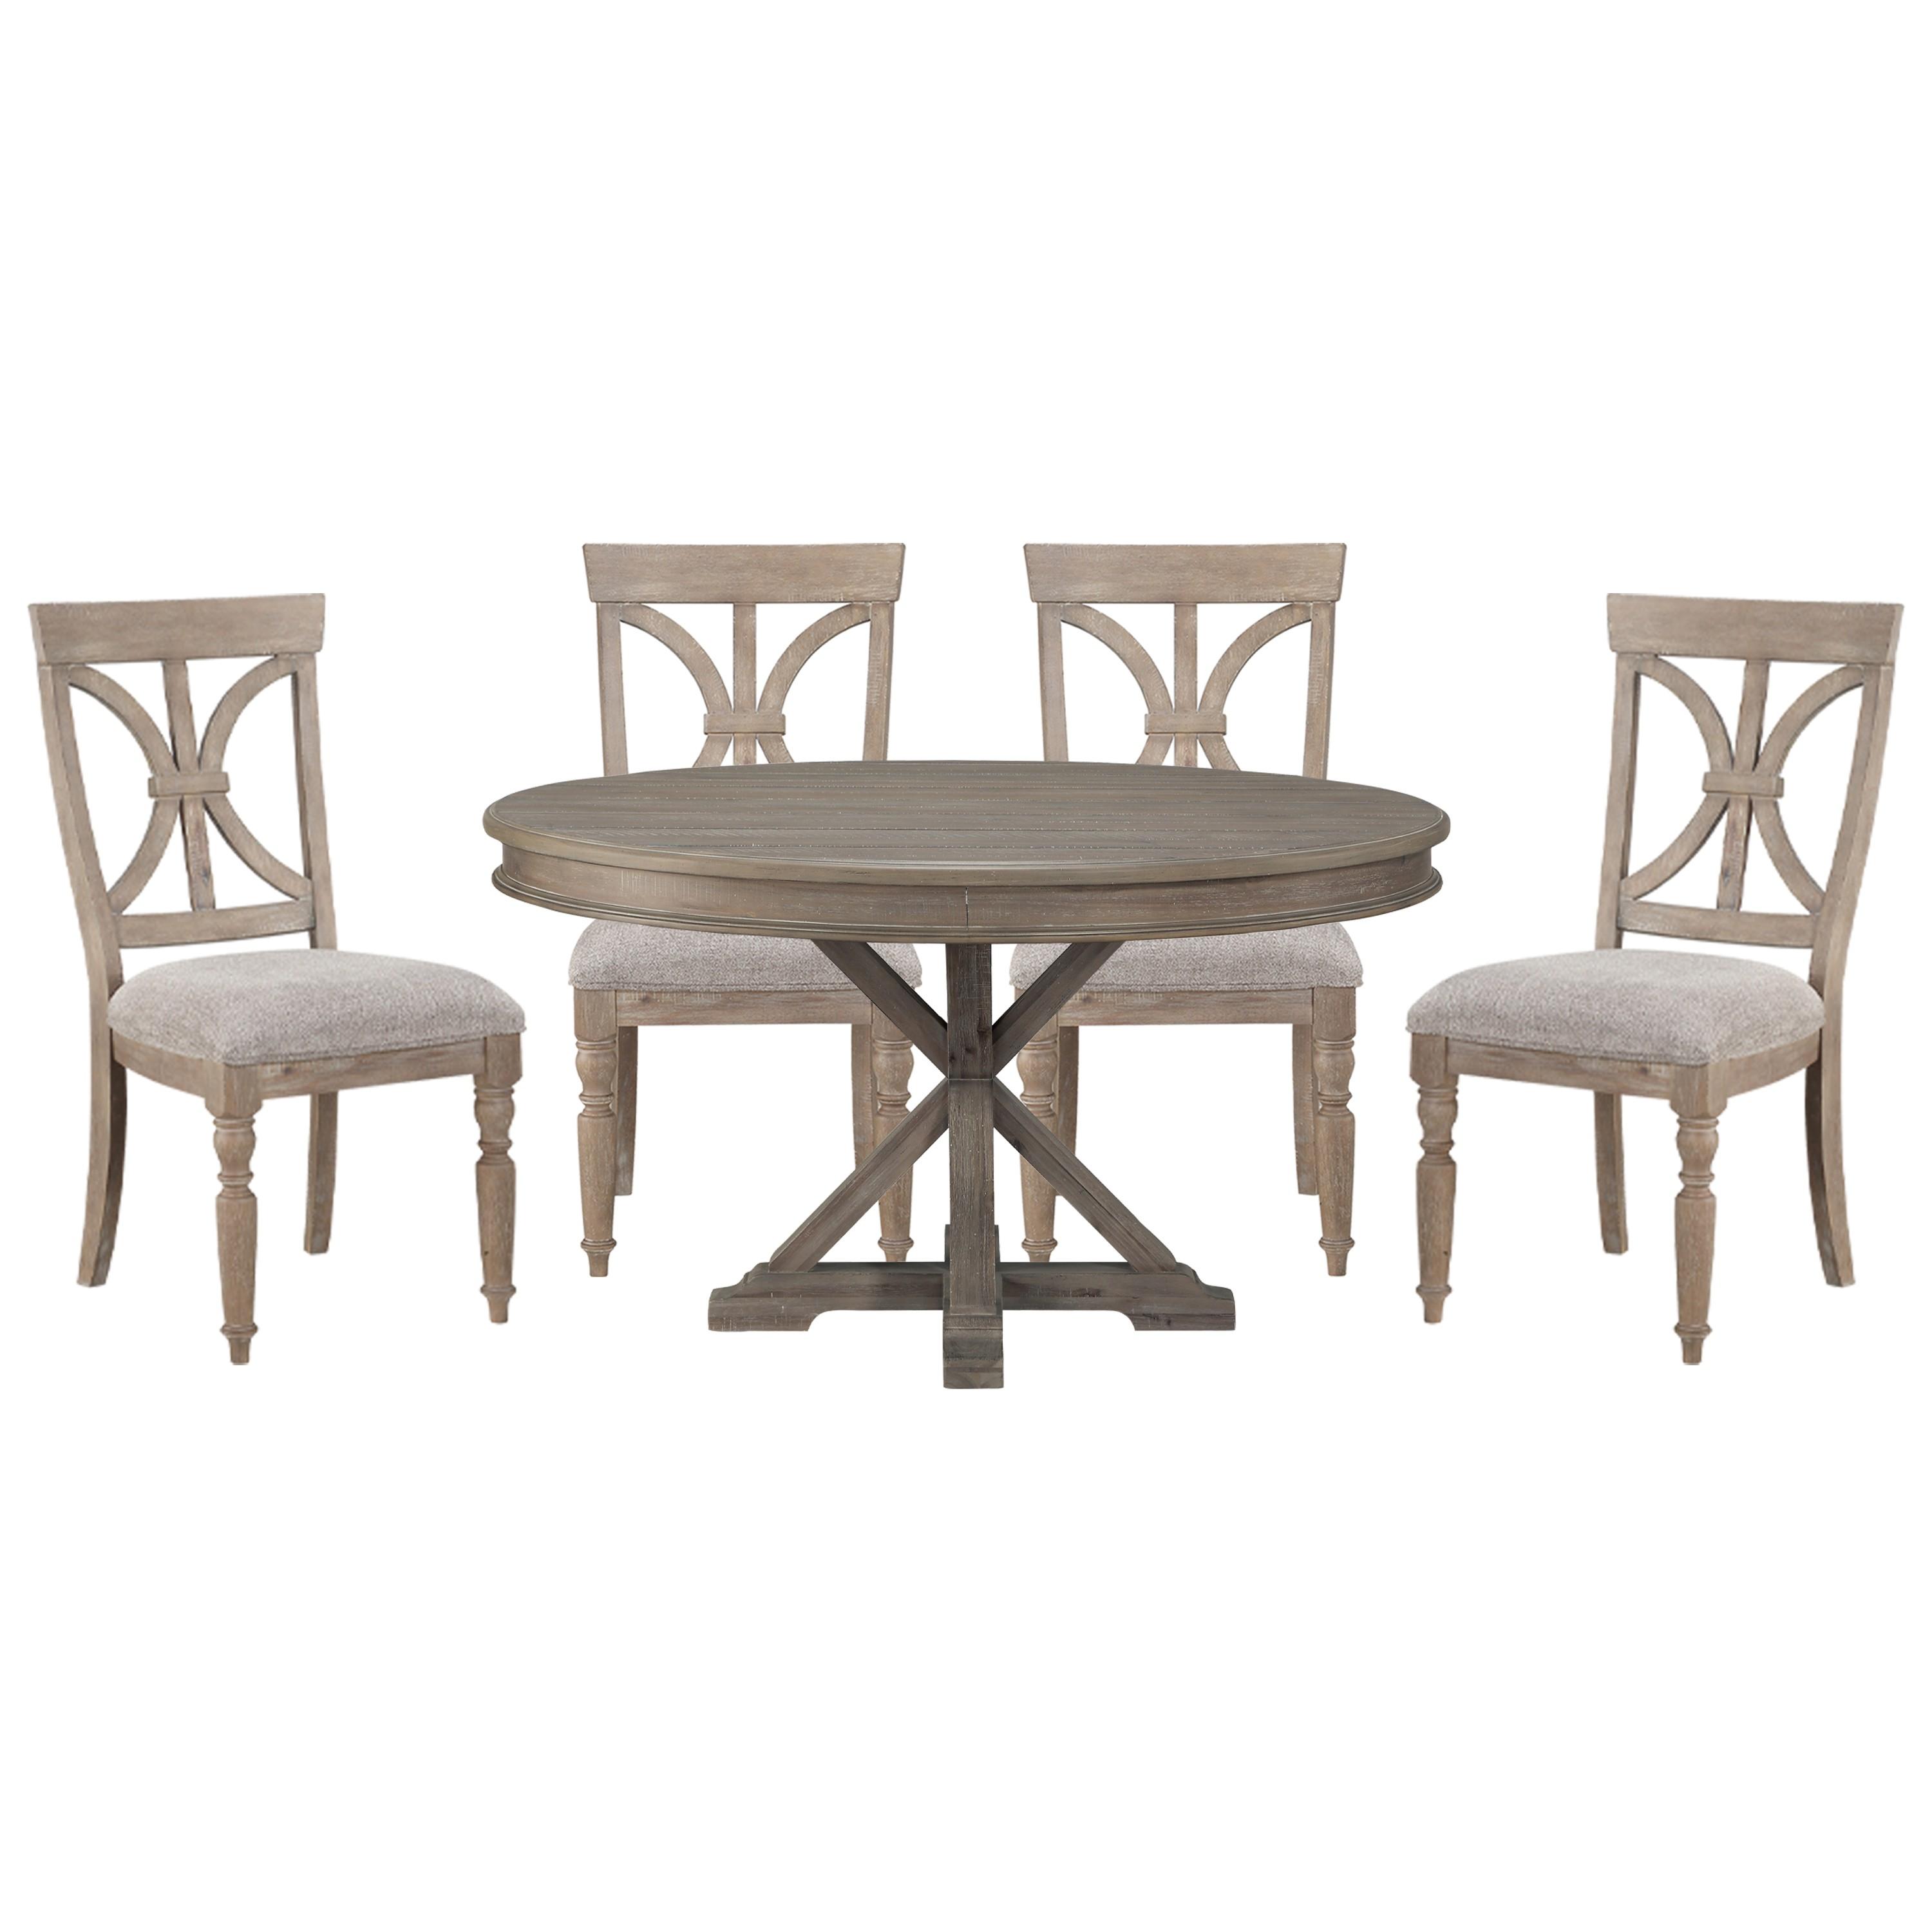 Transitional Dining Room Set 1689BR-54*5PC Cardano 1689BR-54*5PC in Light Brown Polyester